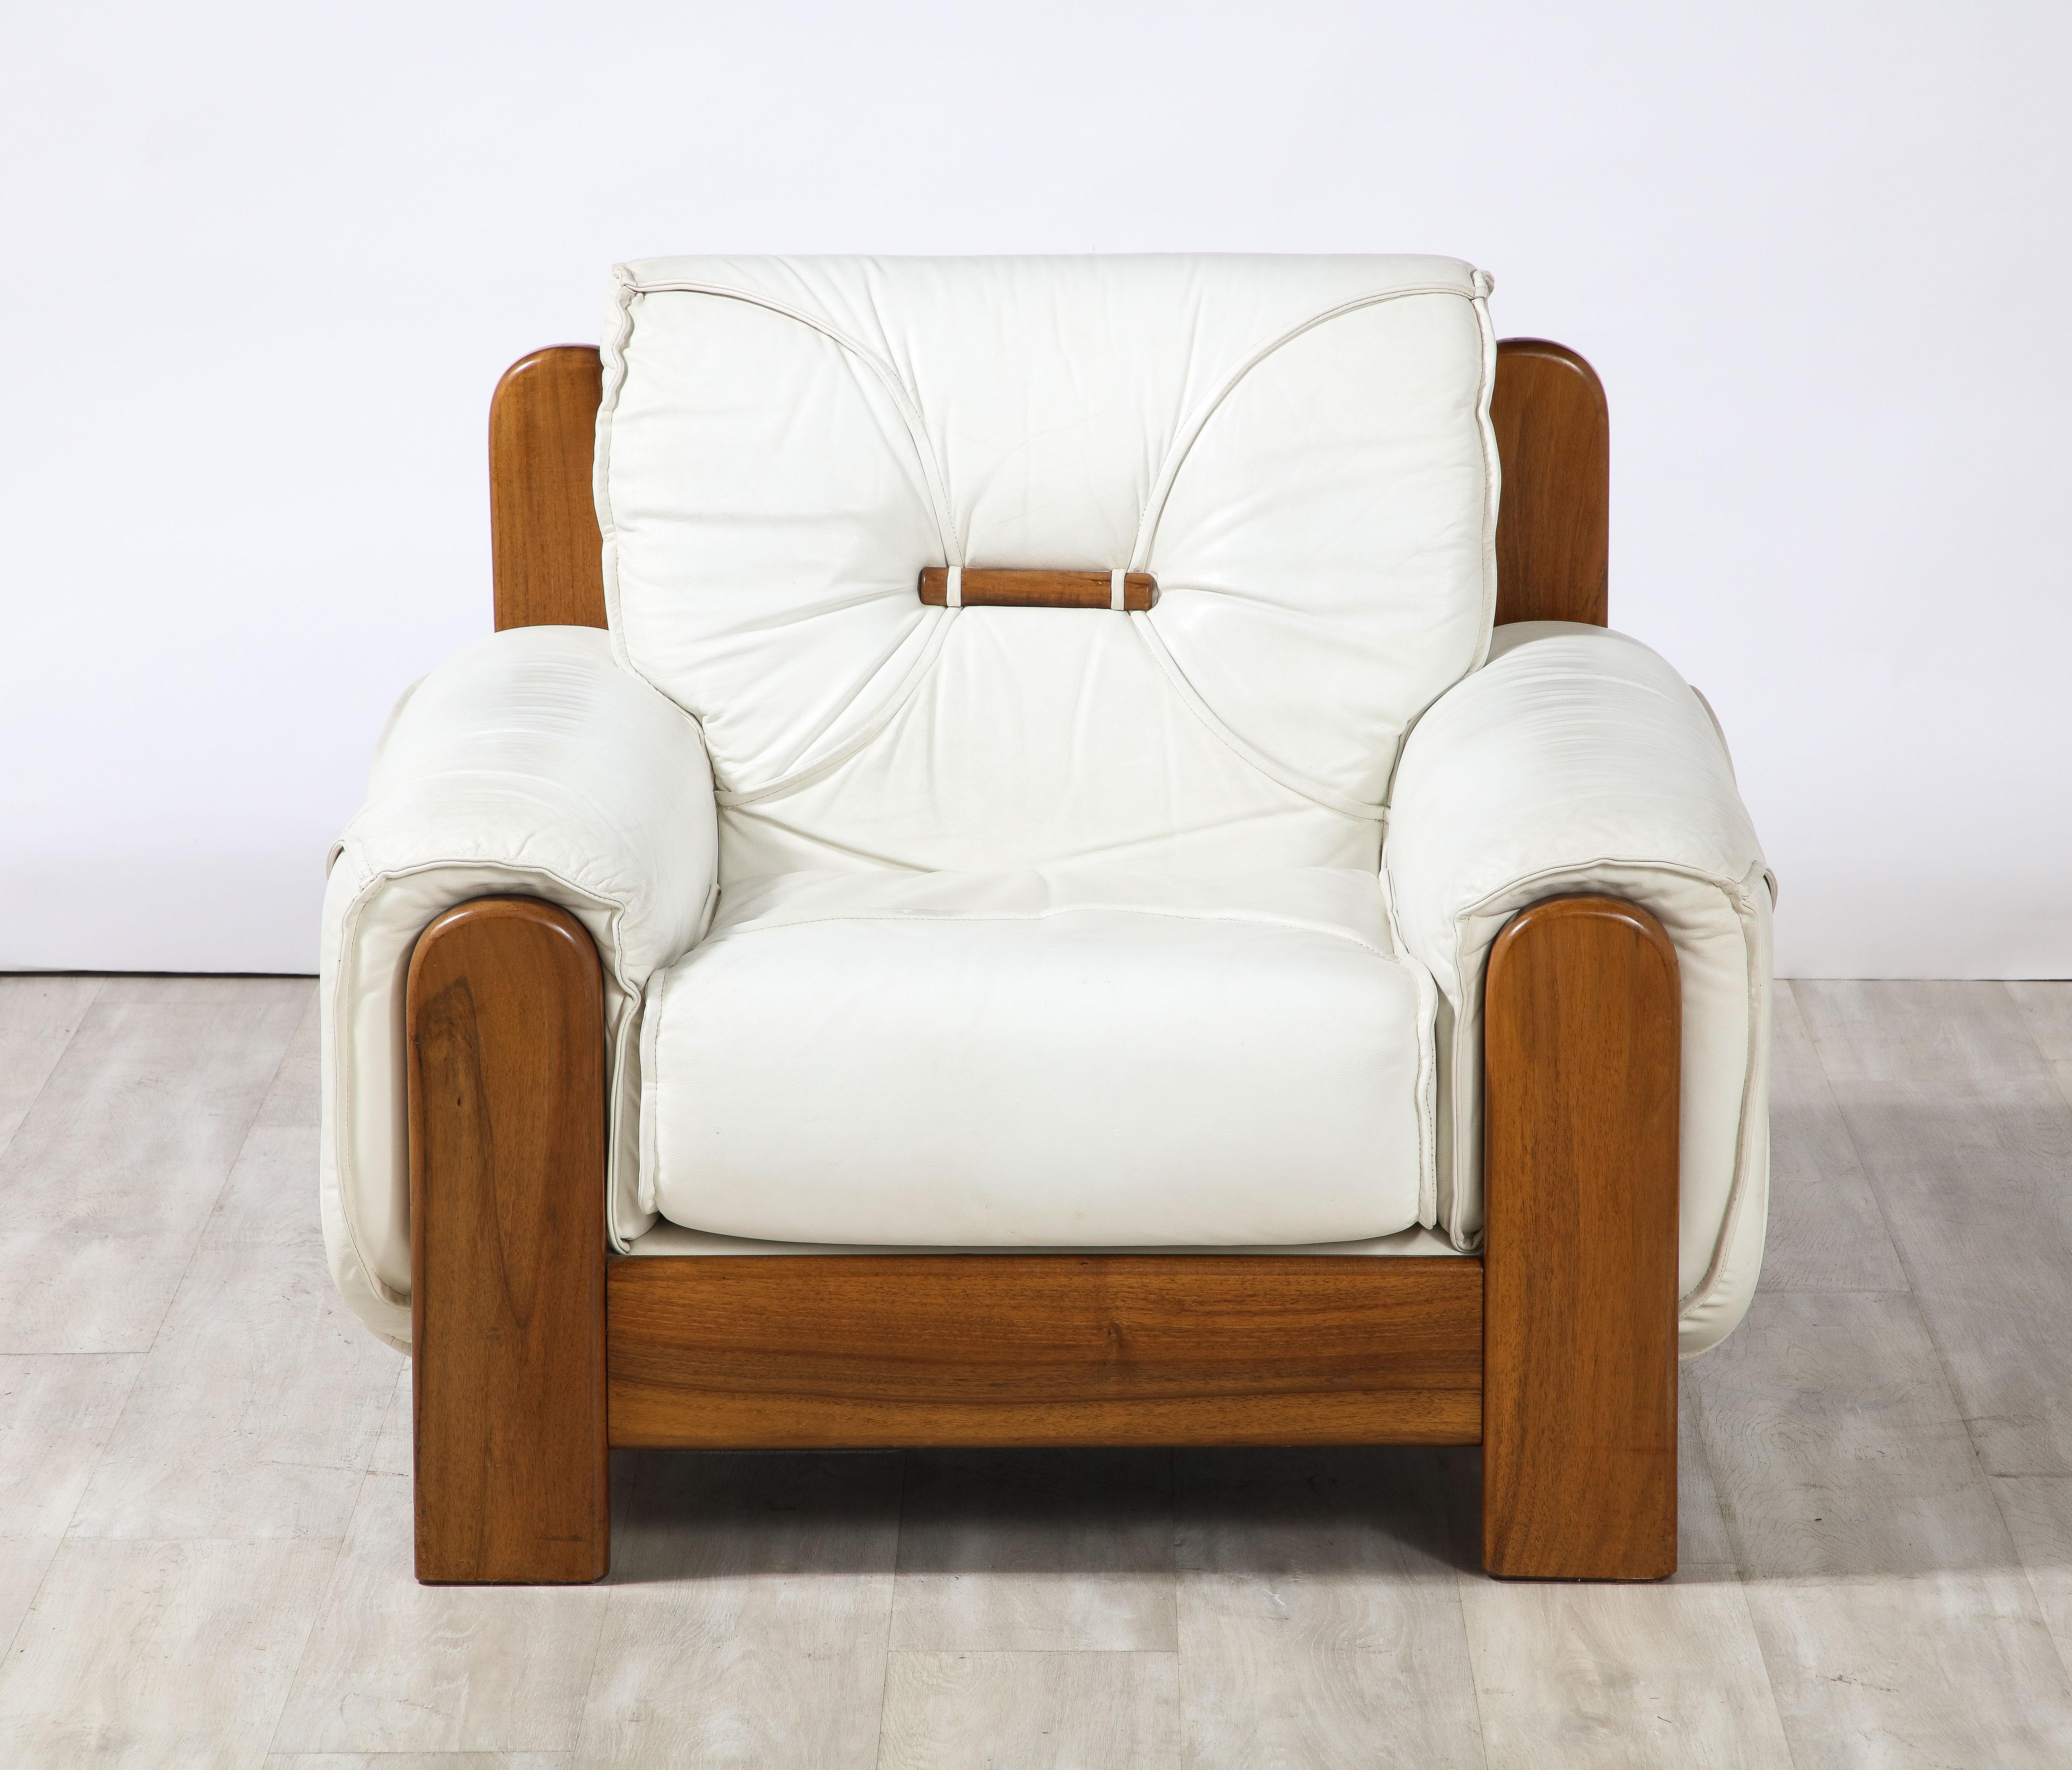 Pair of Italian 1970's Walnut and White Leather Lounge Chairs For Sale 2